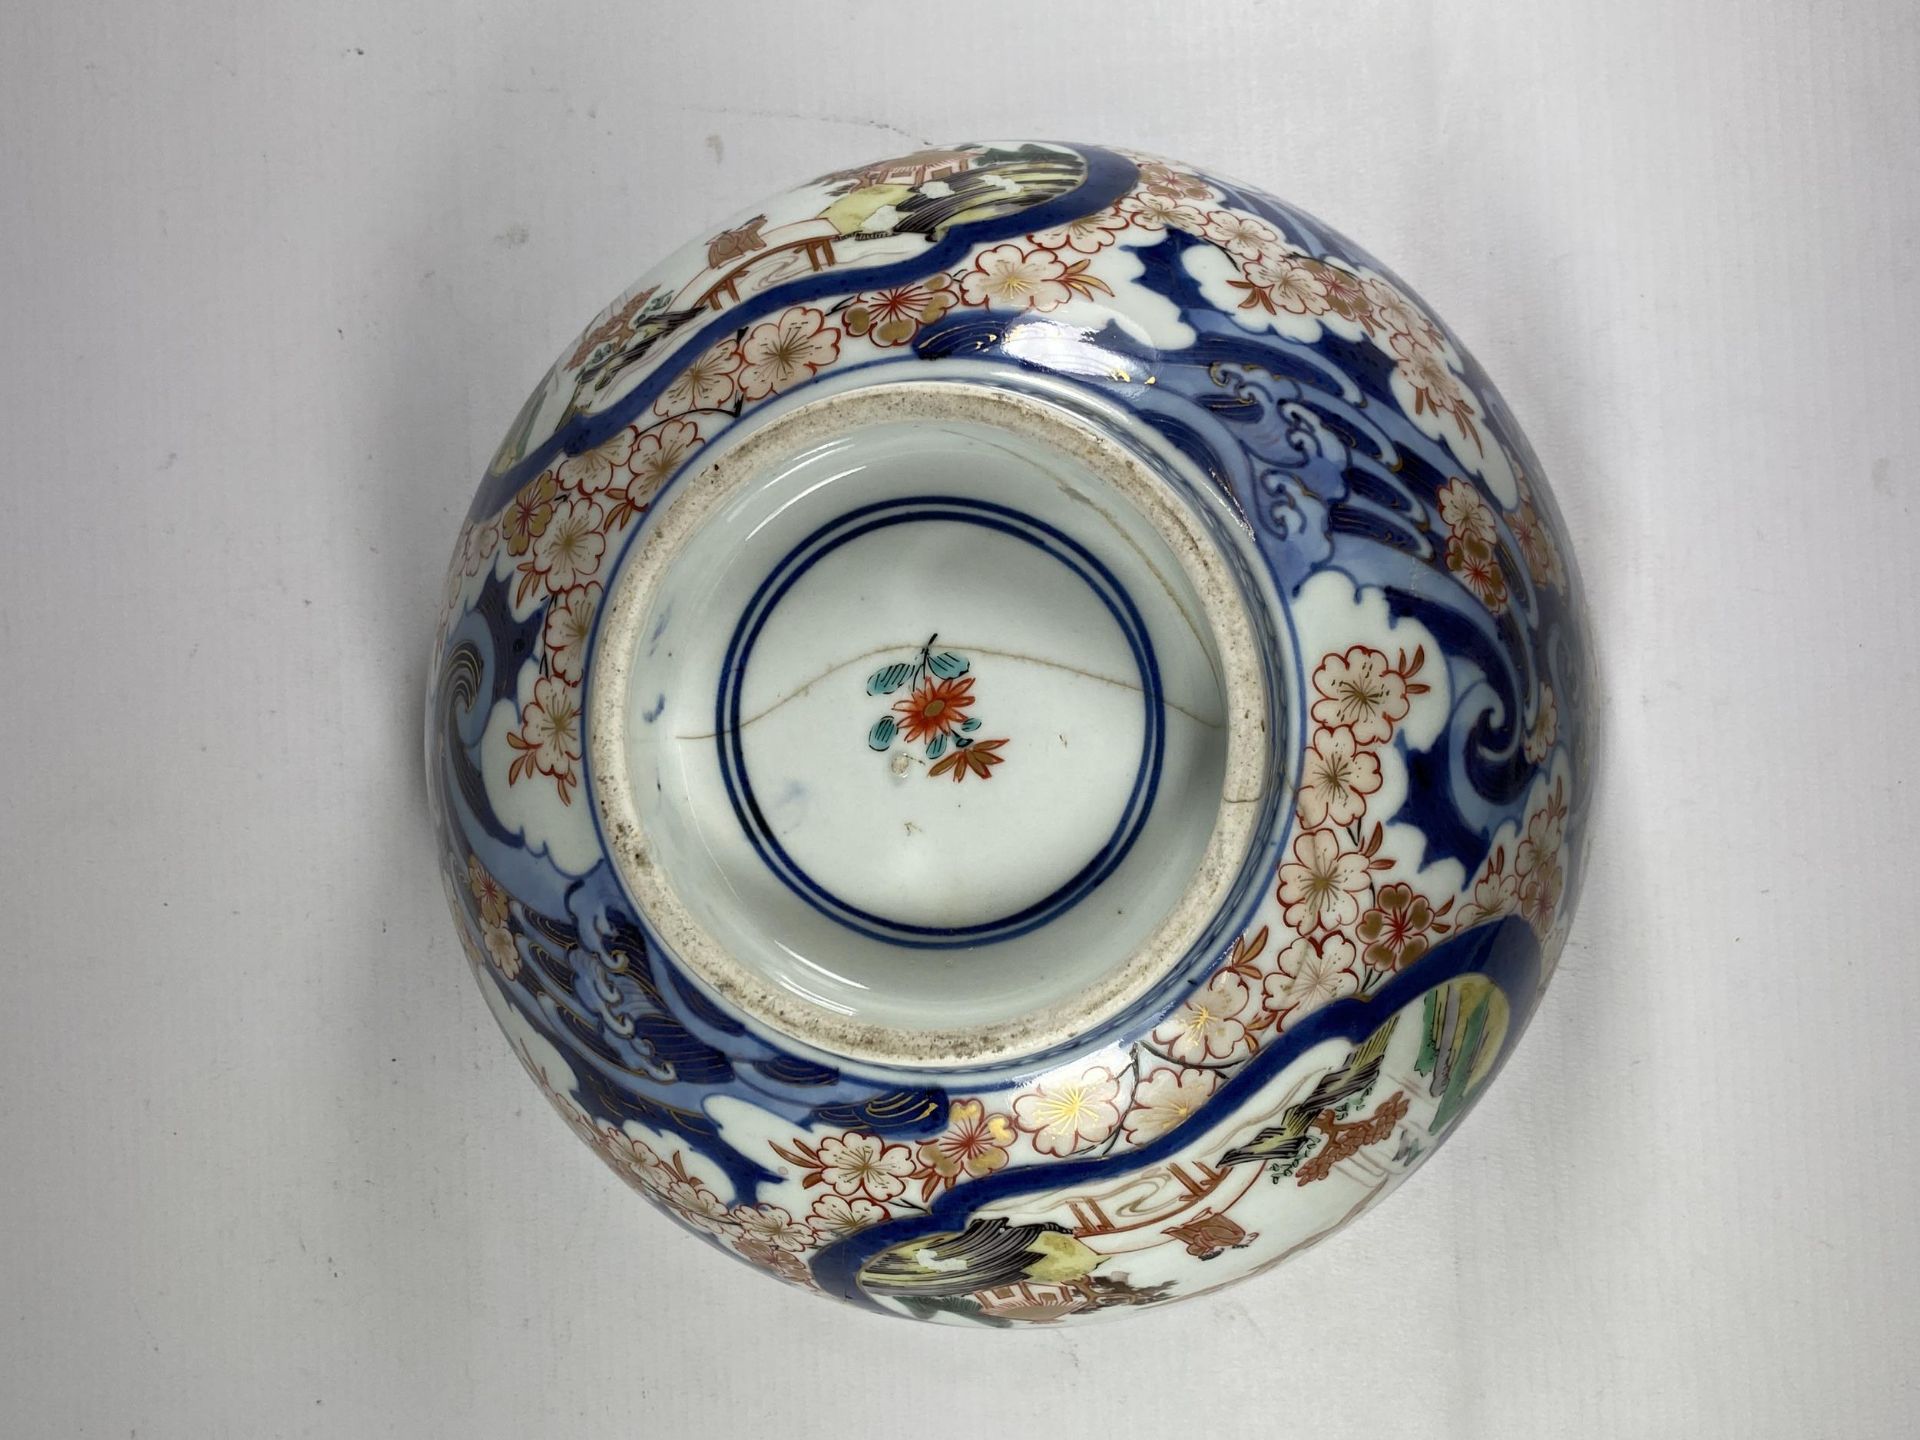 A LARGE JAPANESE MEIJI PERIOD (1868-1912) IMARI PORCELAIN FRUIT BOWL, FLORAL AND DOUBLE RING MARK TO - Image 6 of 9